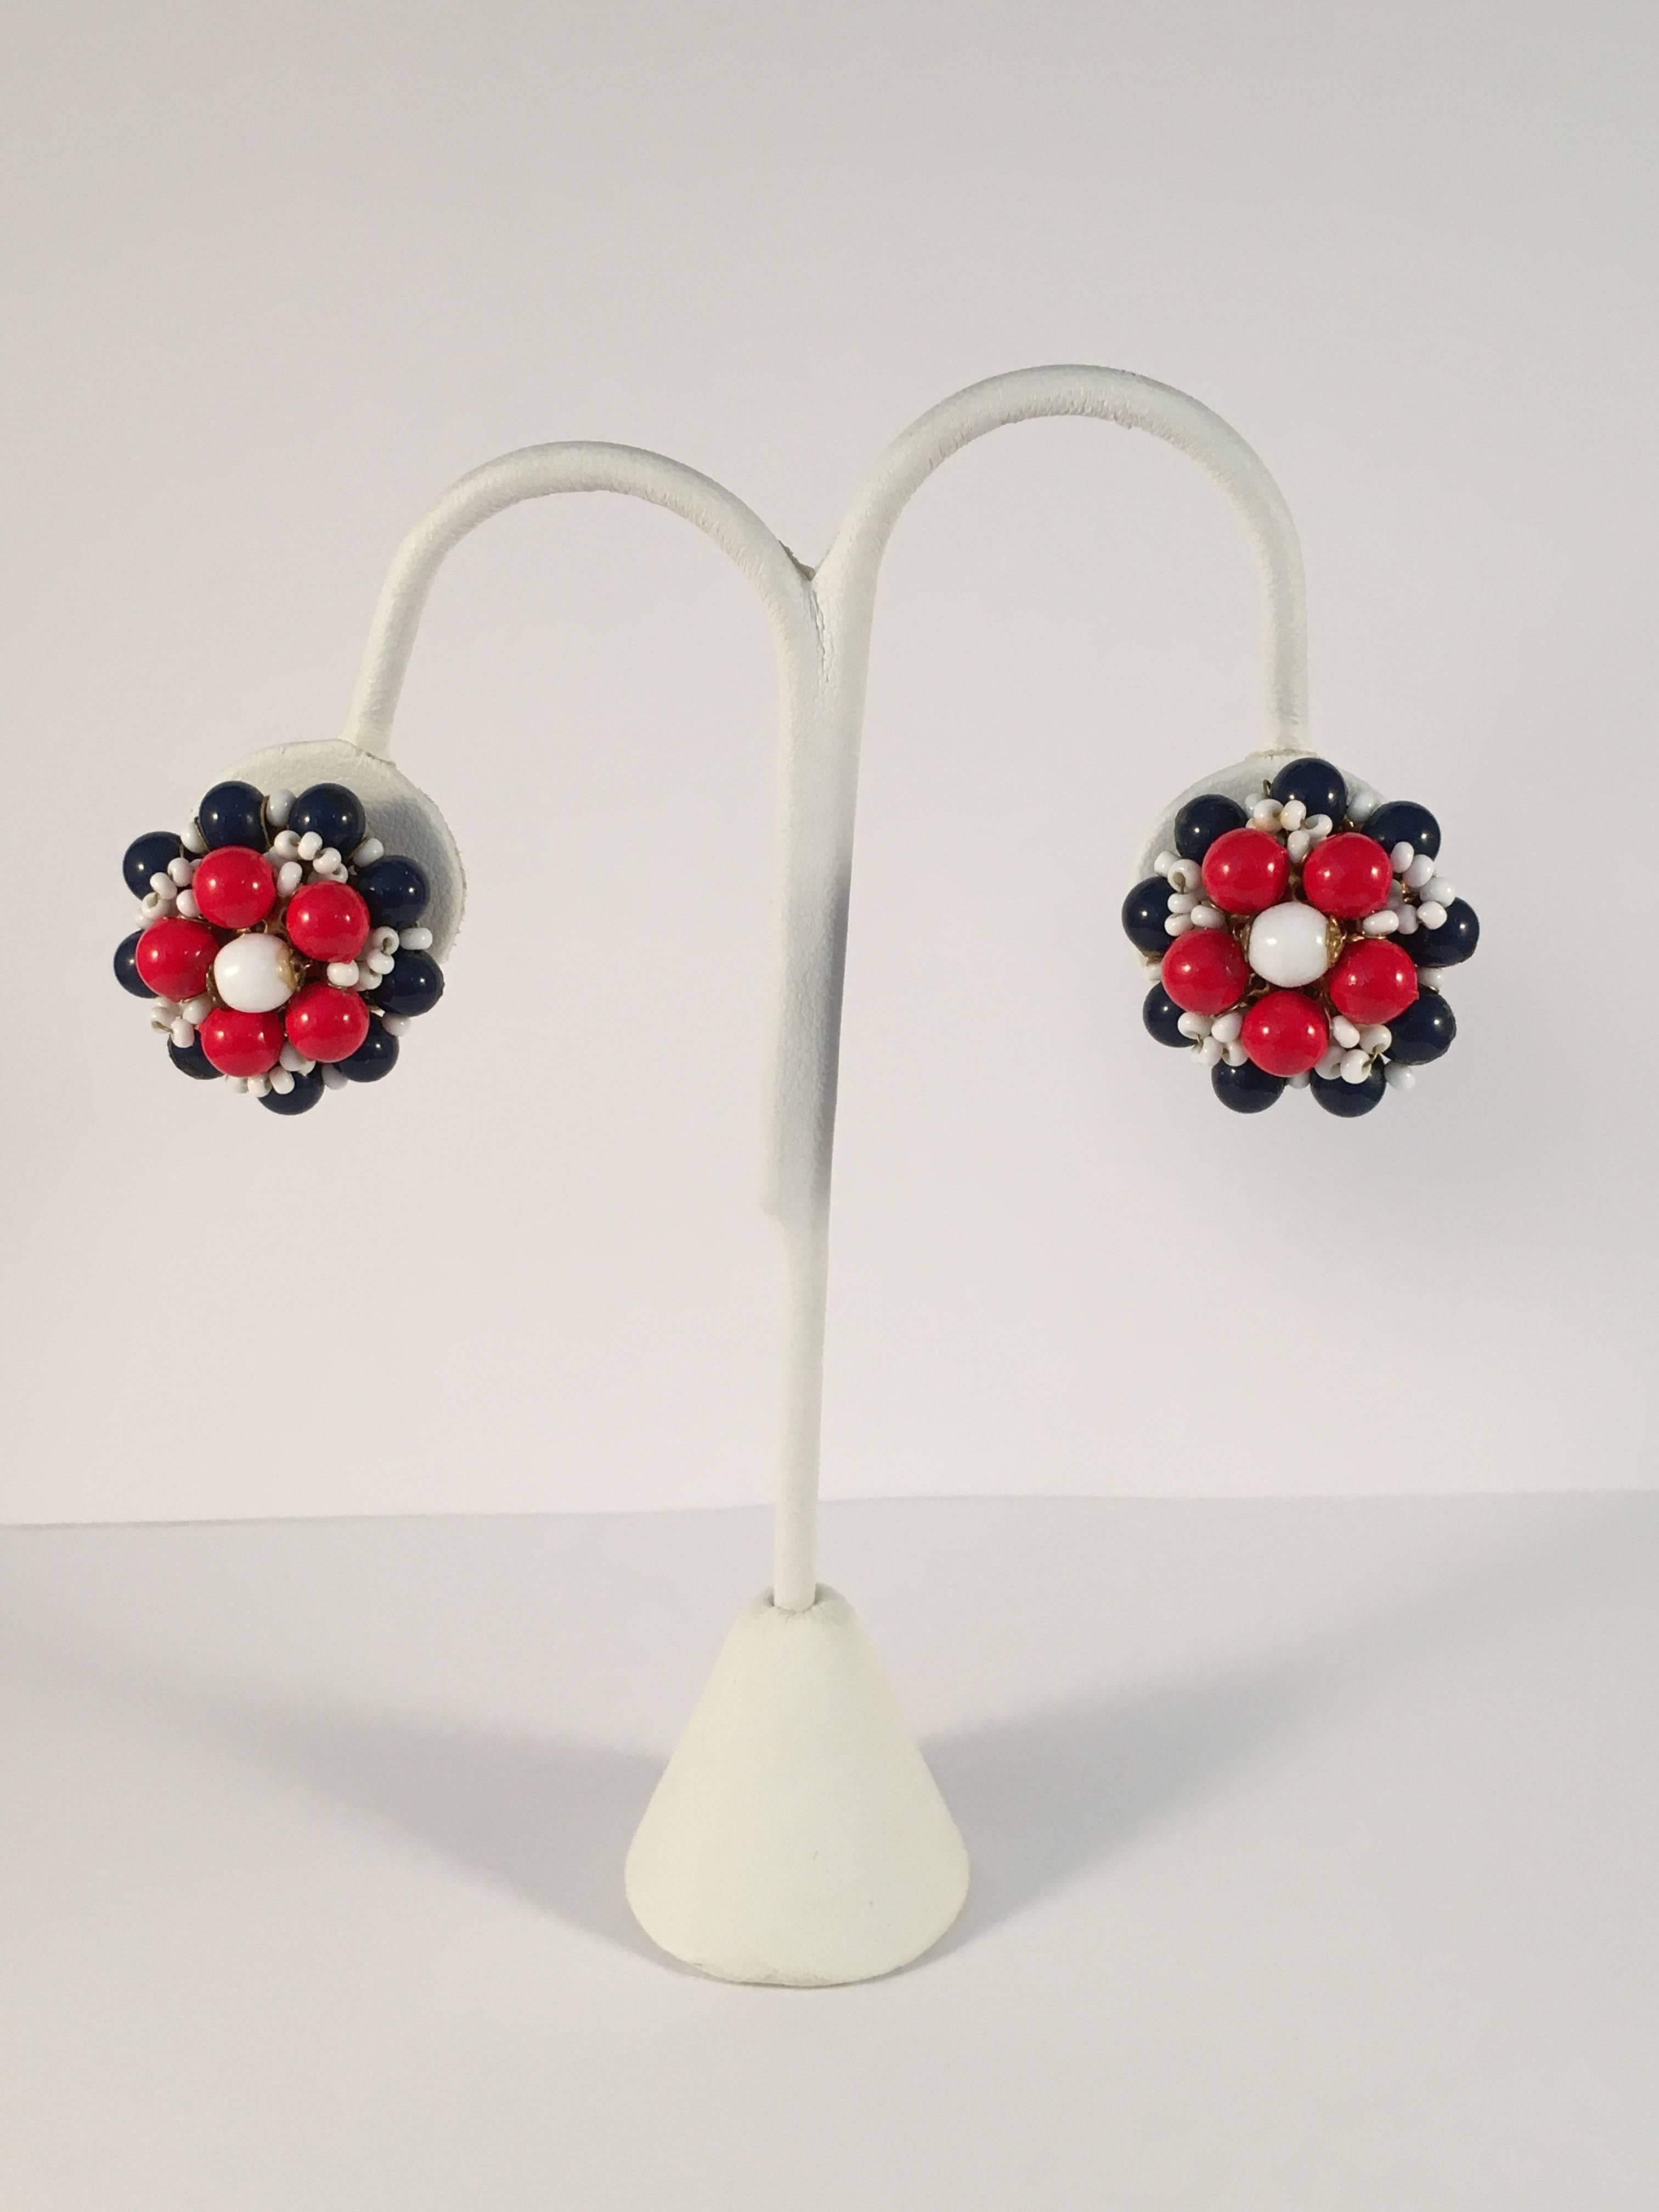 Fun MOD 1960s Miriam Haskell red, white and blue beaded clip-on earrings. Classic filigree backs with brass wired elements. The earrings measure 1" in diameter. They are clip earrings and have a clip-screw hardware mechanism that make for